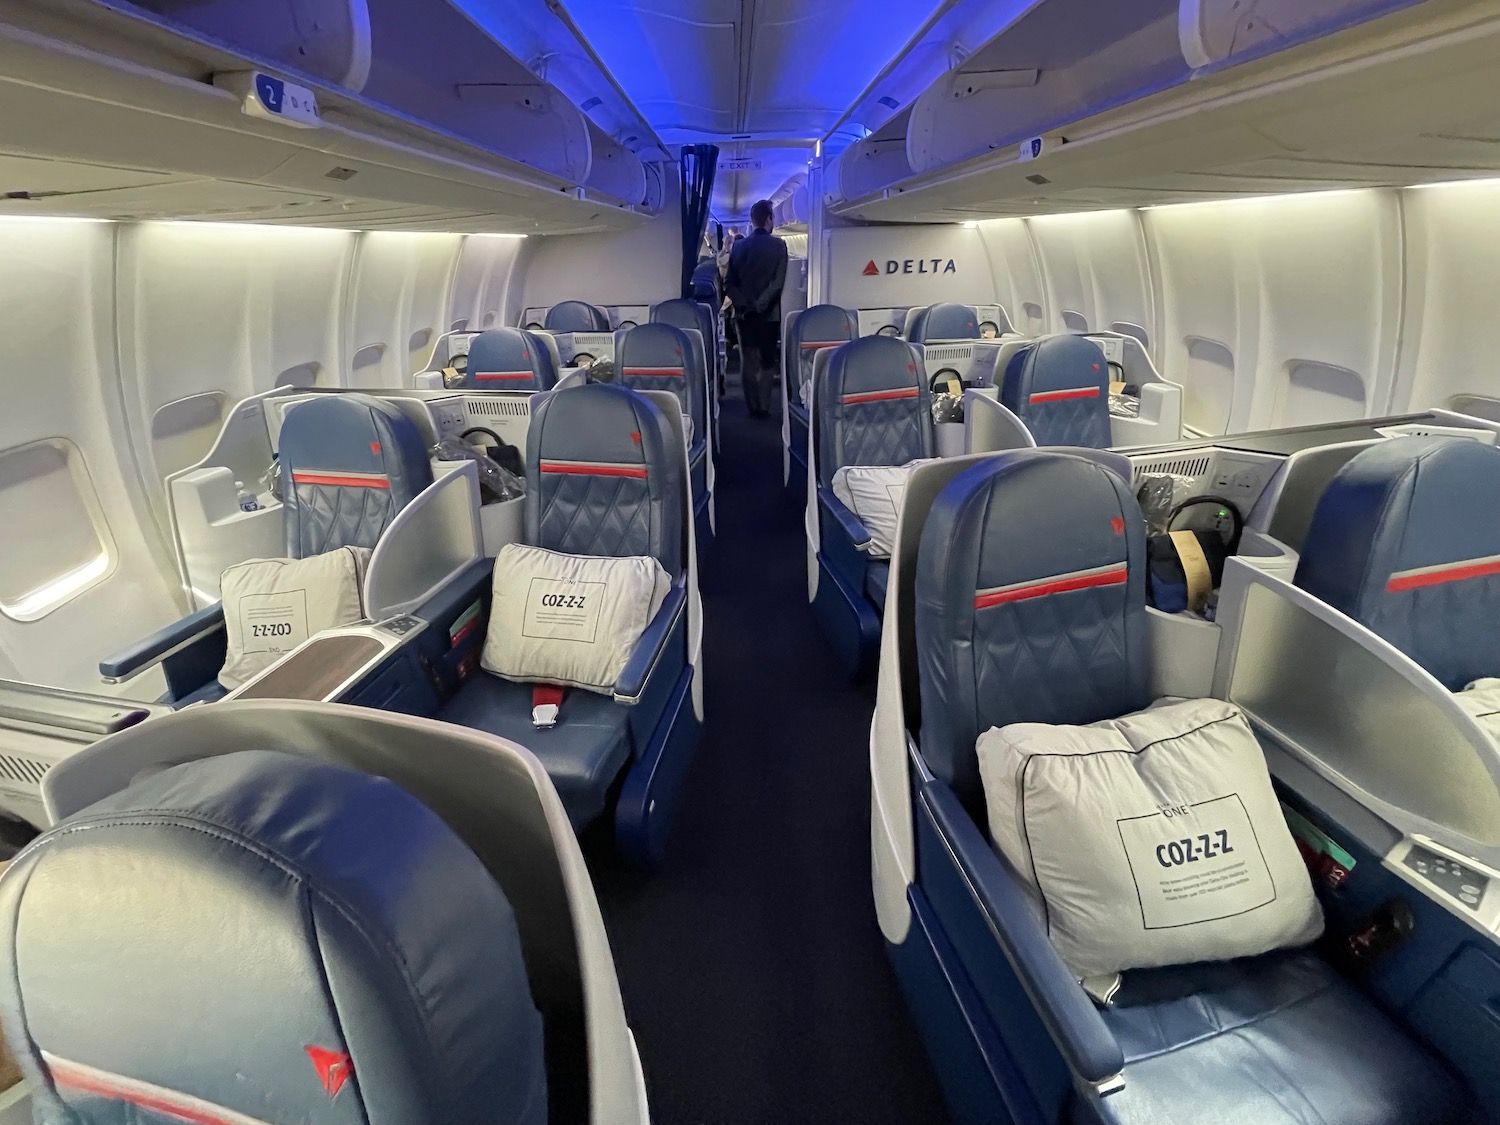 757-200 35F or 36F - both seemingly have great legroom. Which is ideal for  redeye sleep SFO-JFK? : r/delta